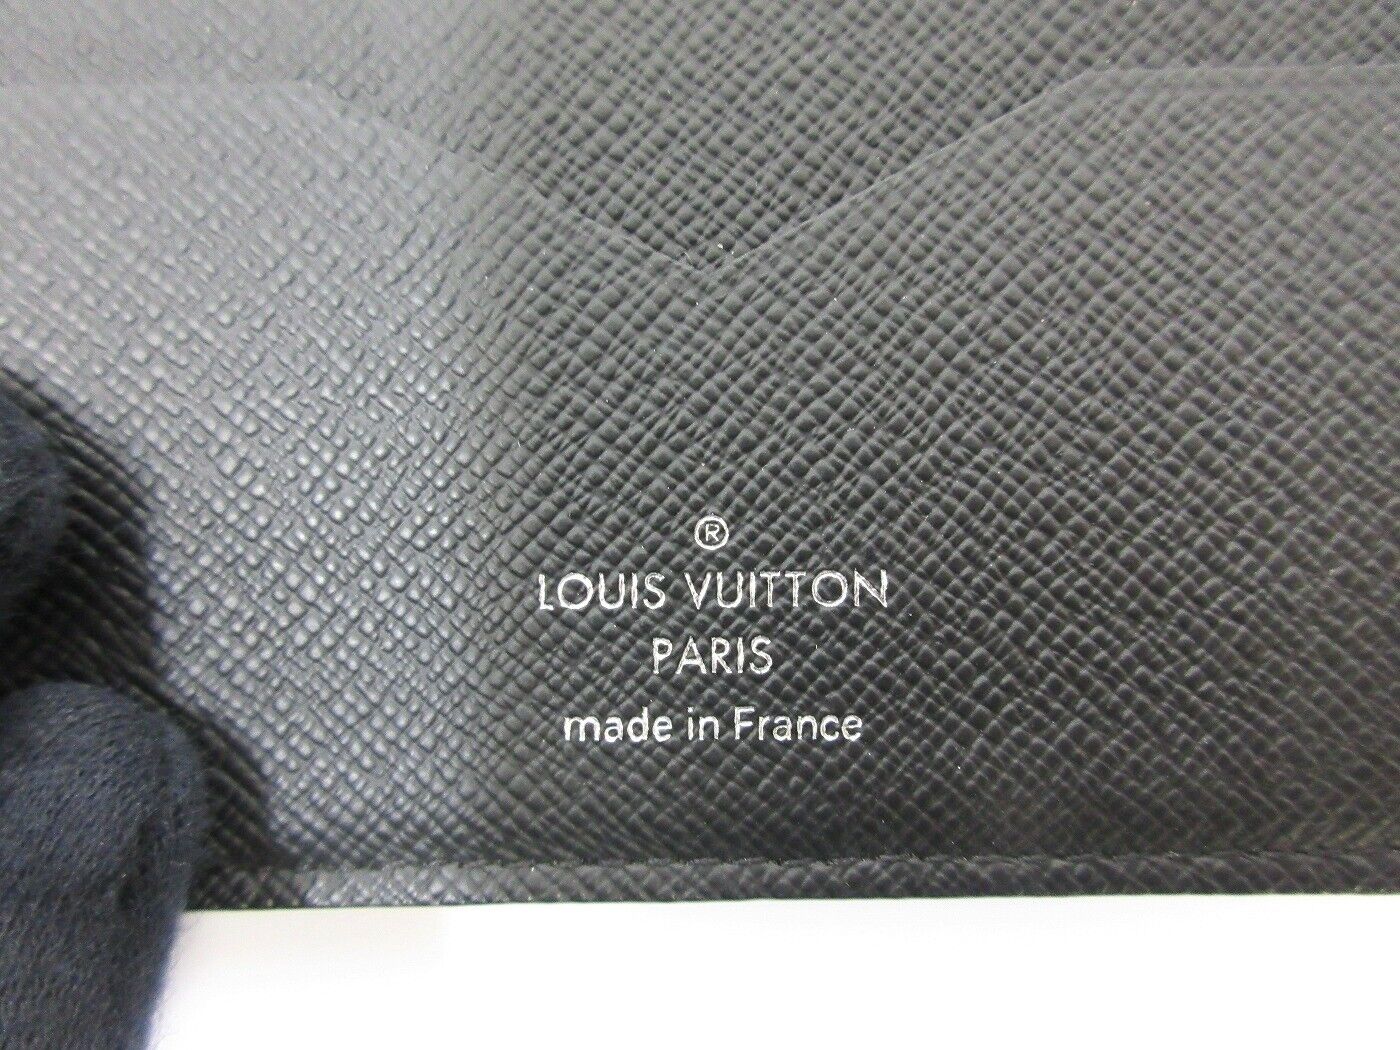 Shop Louis Vuitton Pince wallet (M62978) by asyouare